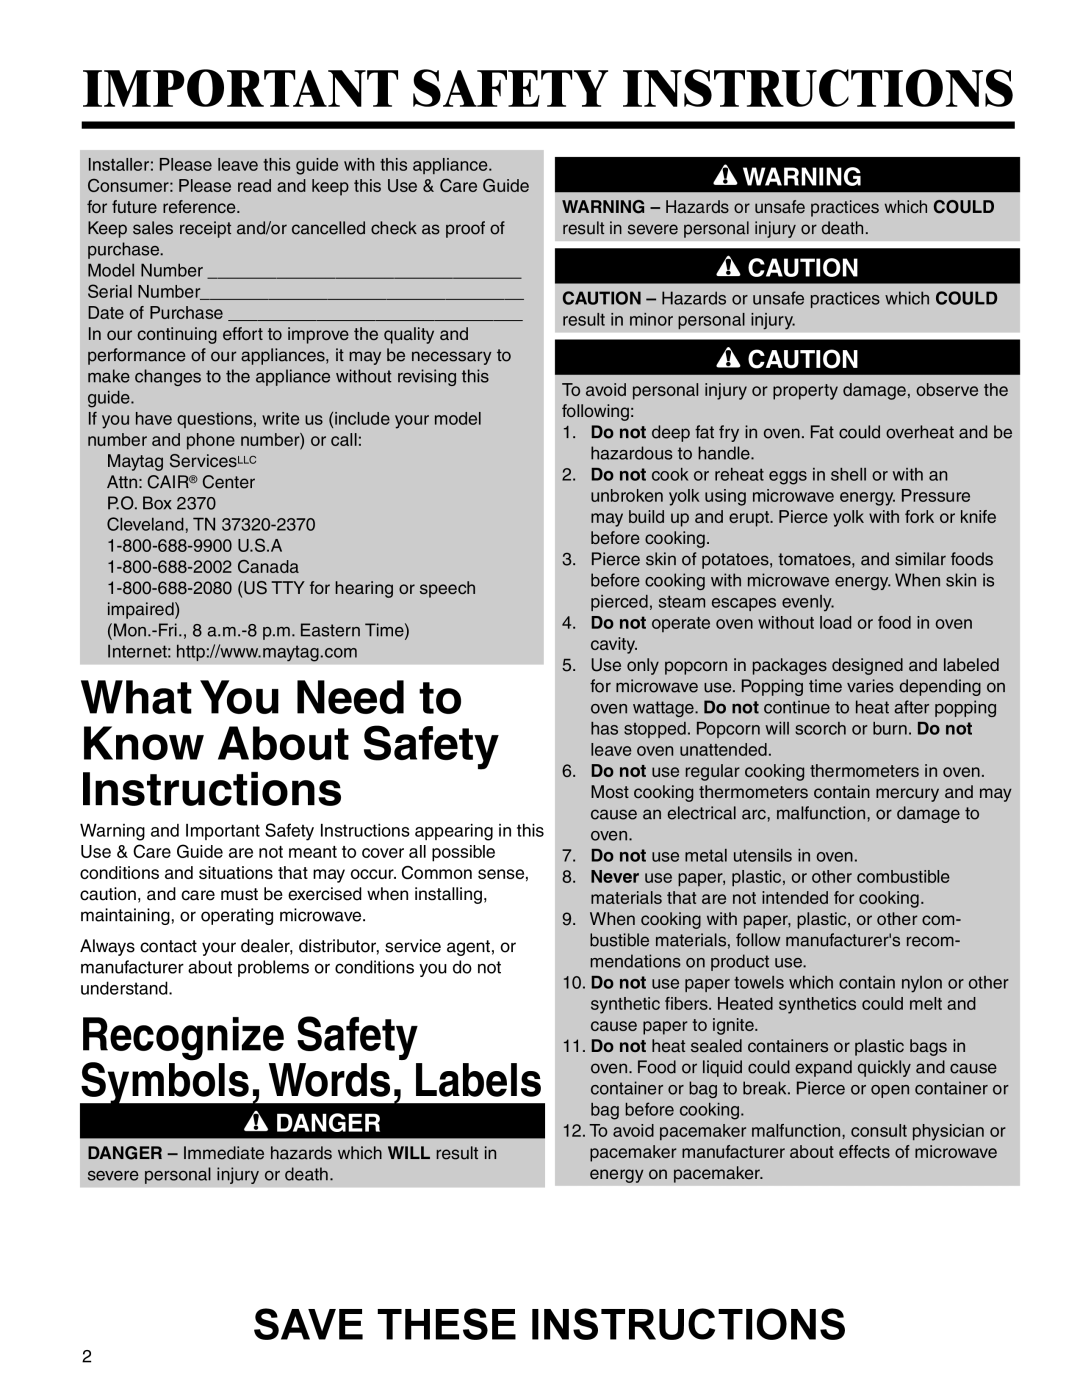 Maytag MMV4205BA Important Safety Instructions, What You Need to Know About Safety Instructions, Save These Instructions 